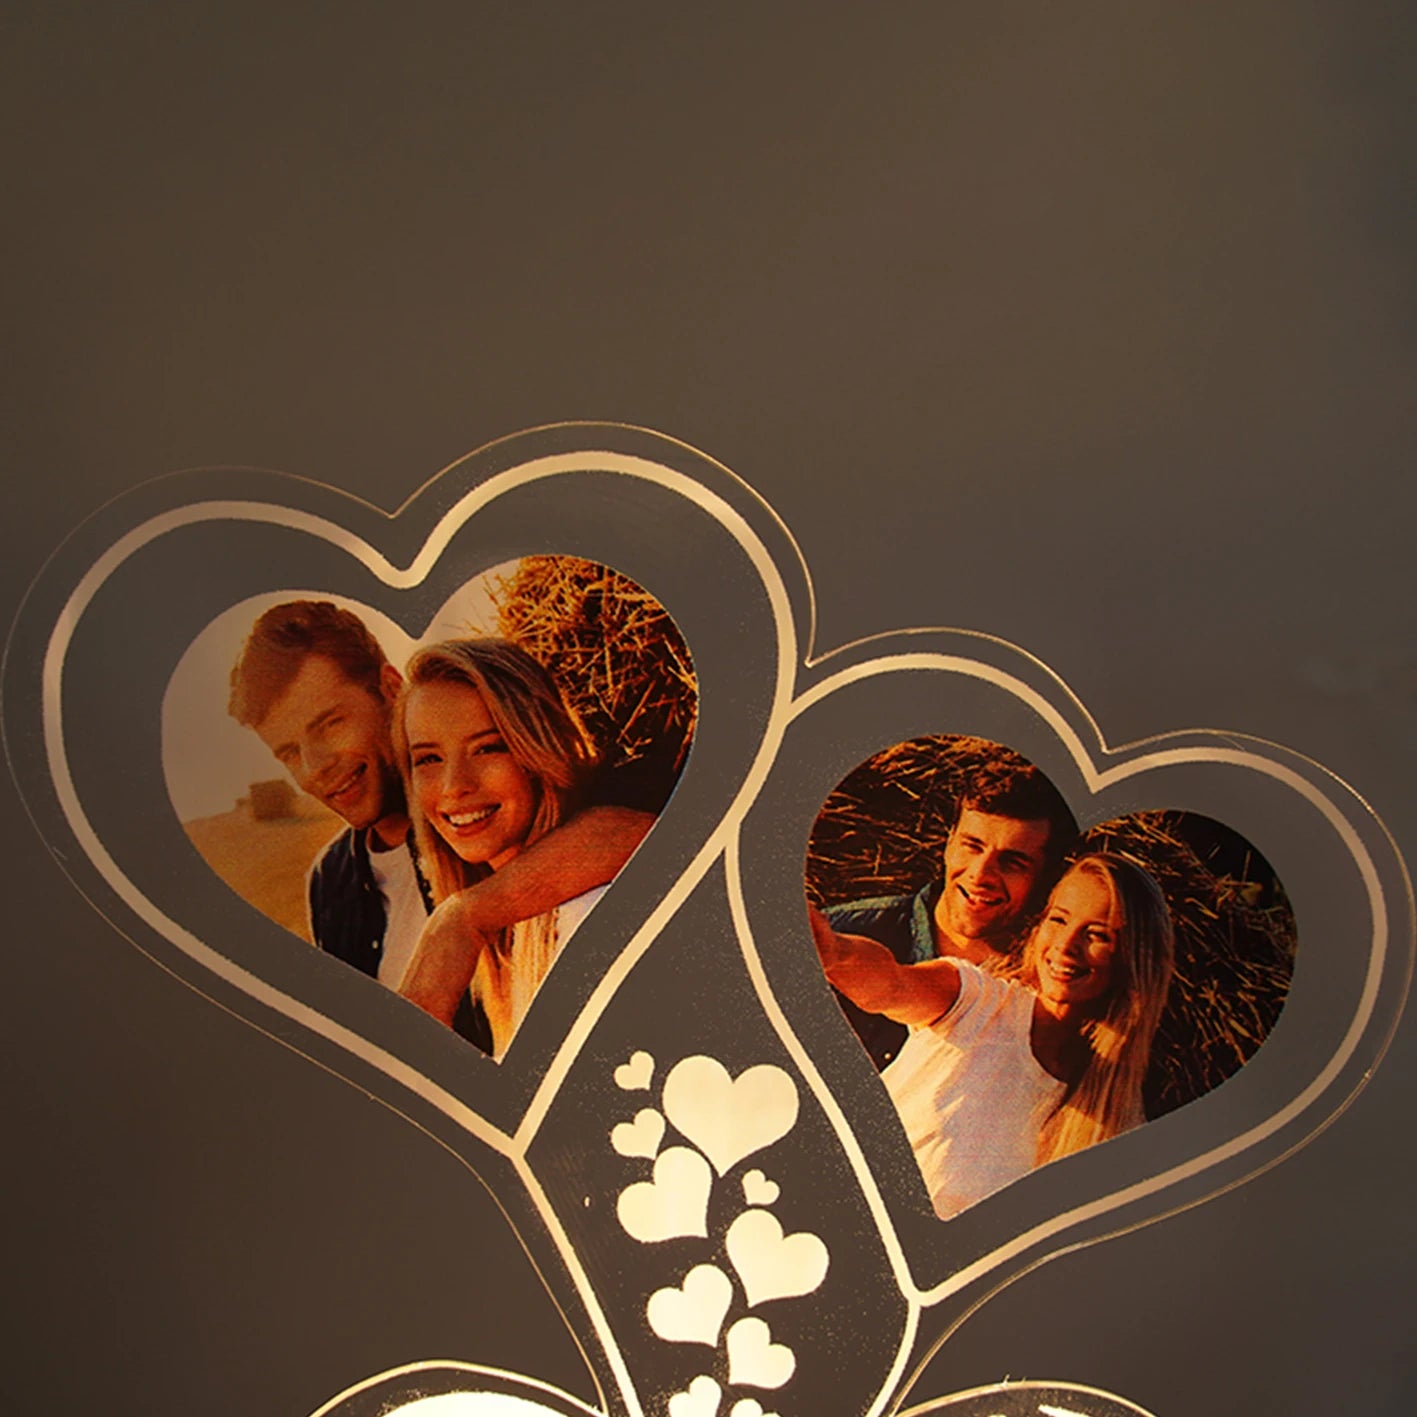 Custom Photo Night Light - Engraved 3D Lamp with Personalized Photo, Gift for Her, Engagement, Couple, Personalized Anniversary Gift for Bedroom Decor